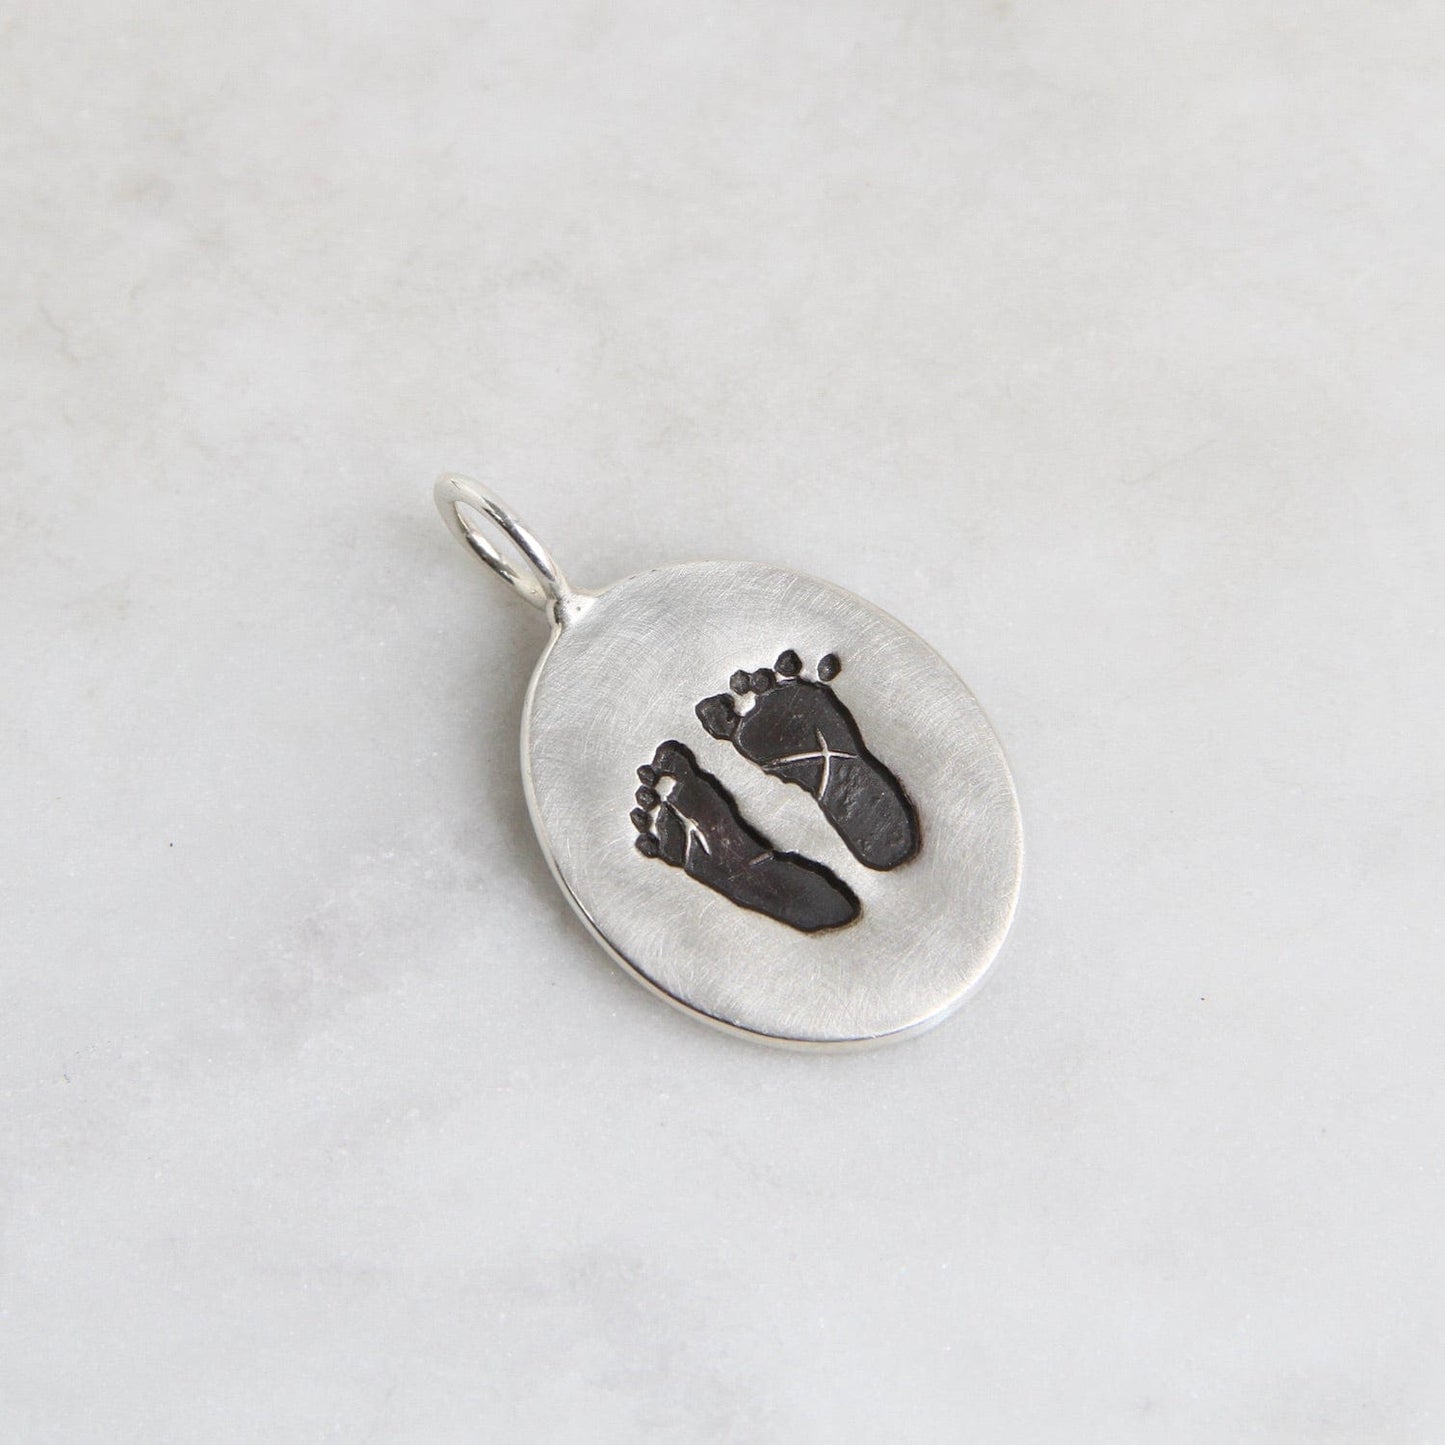 CHM Small Silver Oval Charm - Baby Feet